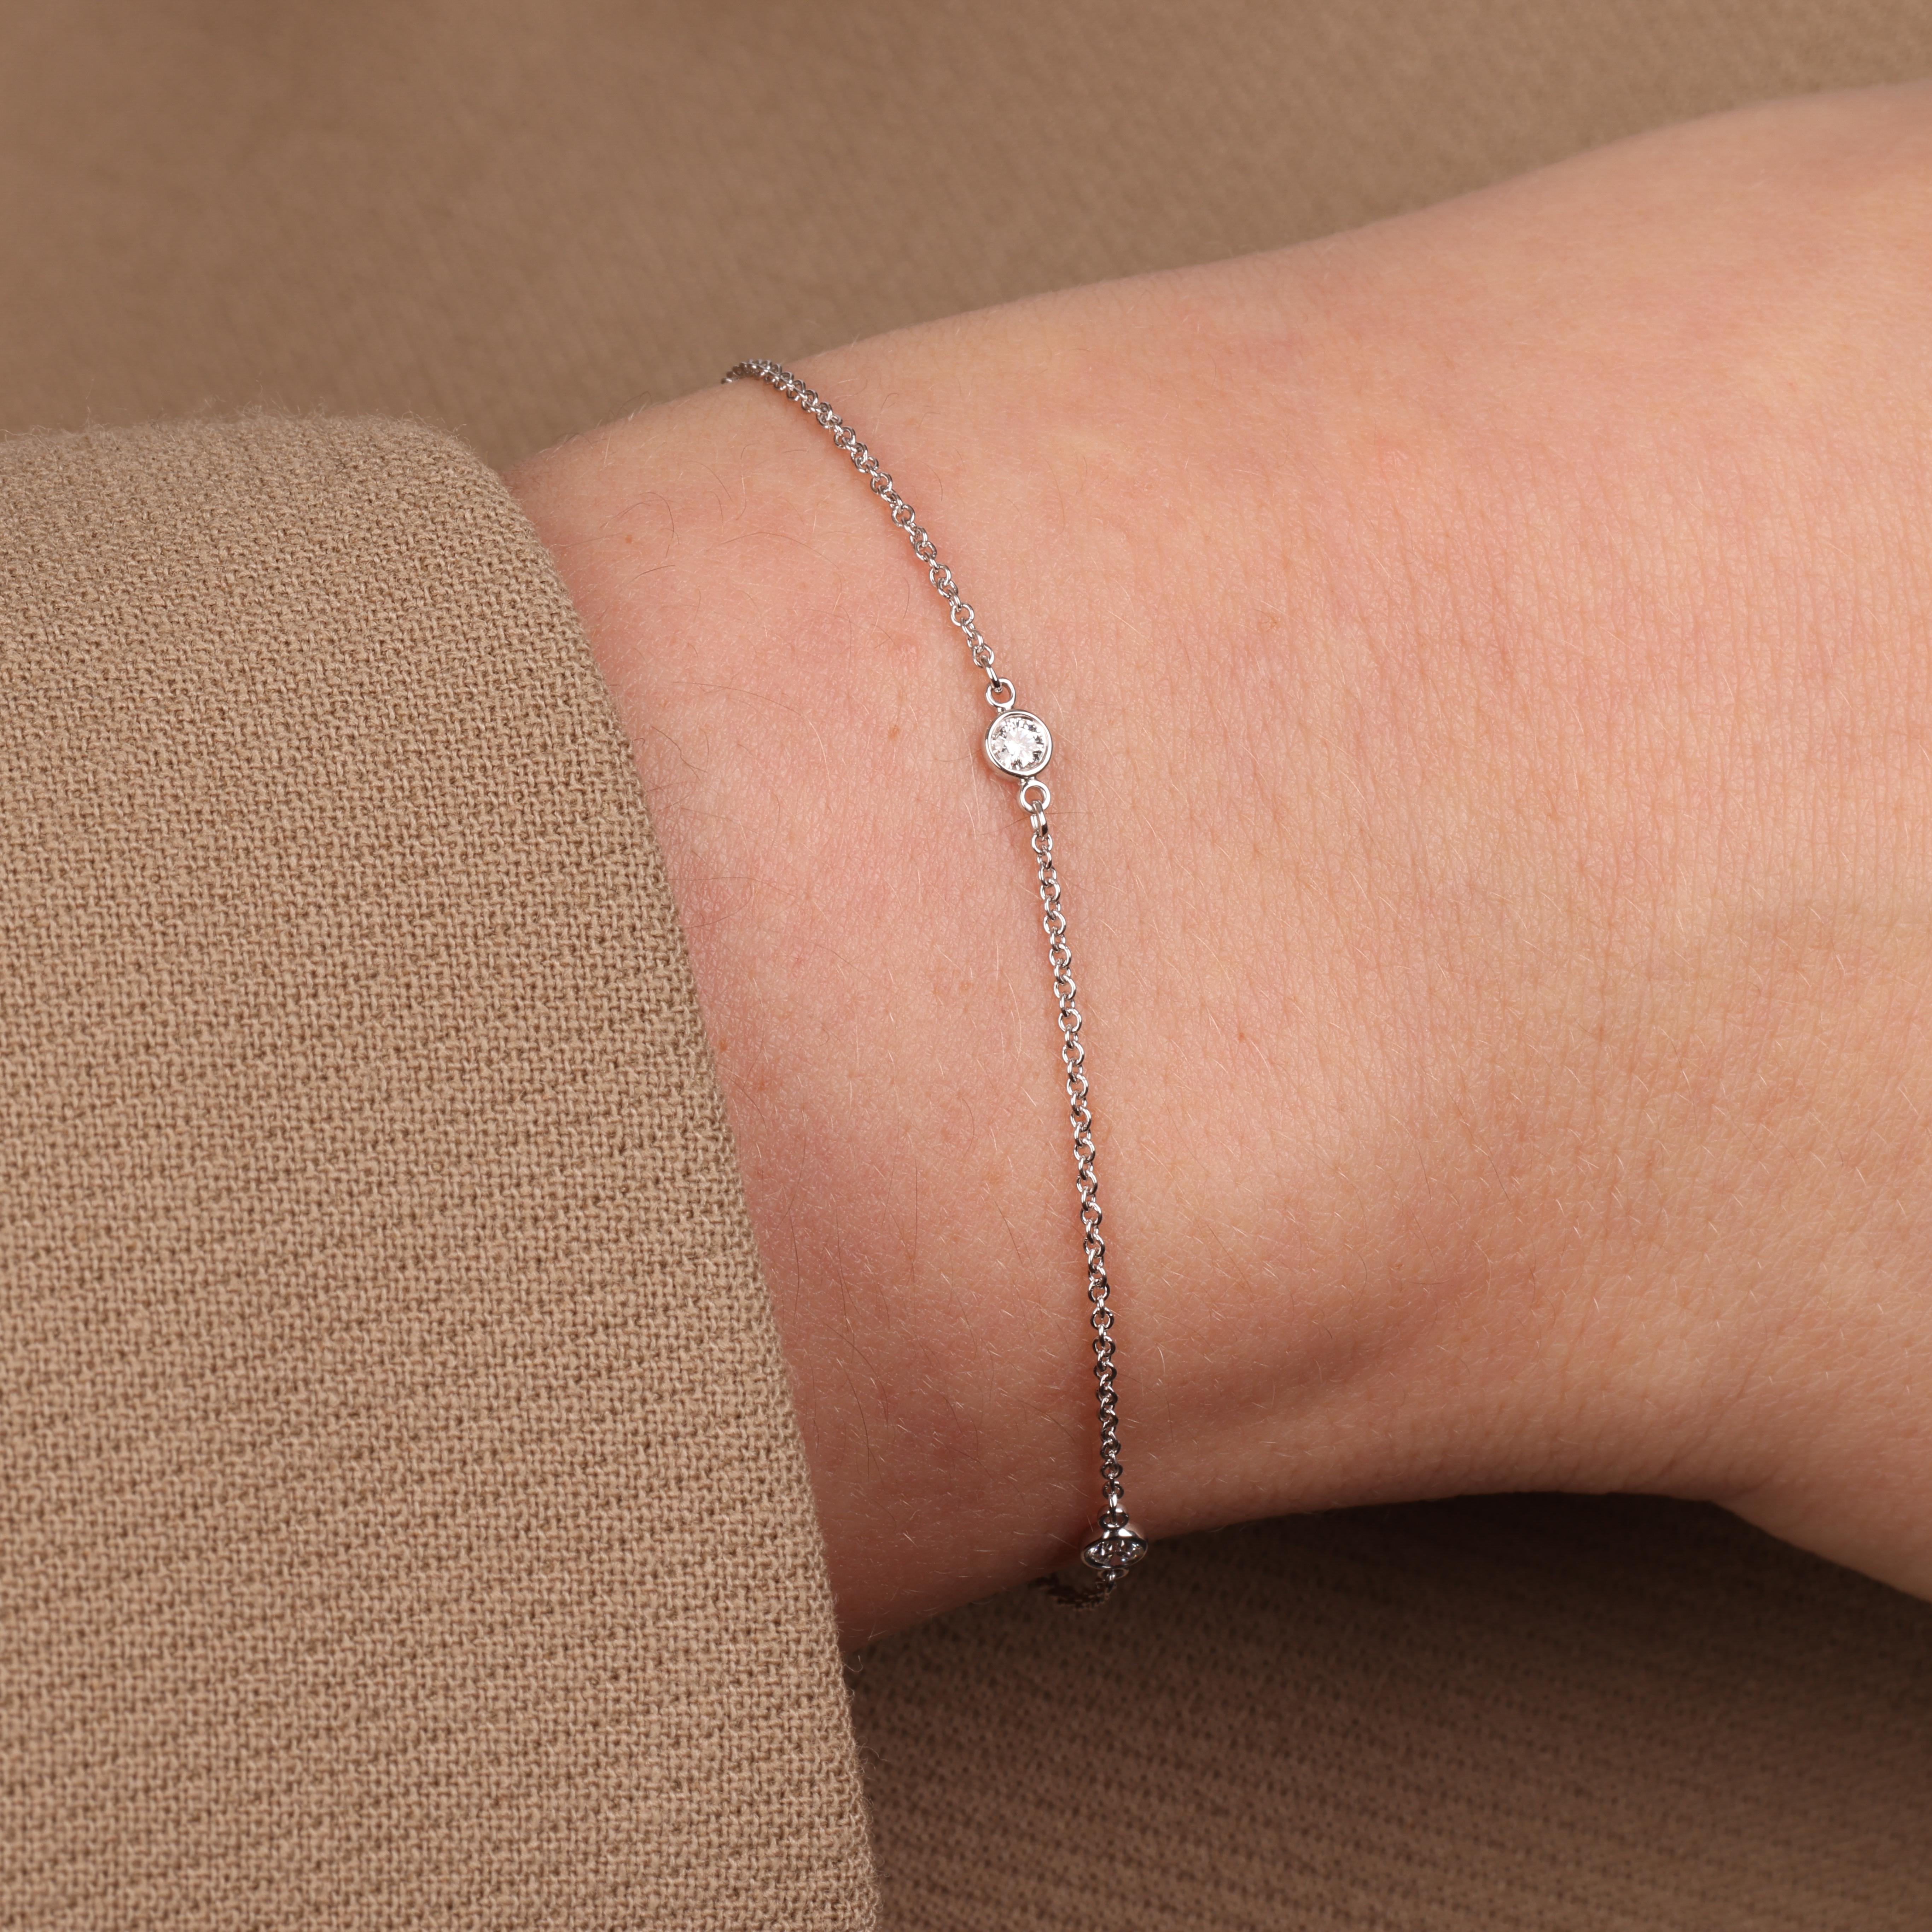 This bracelet by Tiffany & Co is from their Elsa Peretti Diamonds by the Yard collection and features 3 round brilliant cut diamonds set on a platinum chain. Accompanied by a Xupes presentation box. Our Xupes reference is J763 should you need to